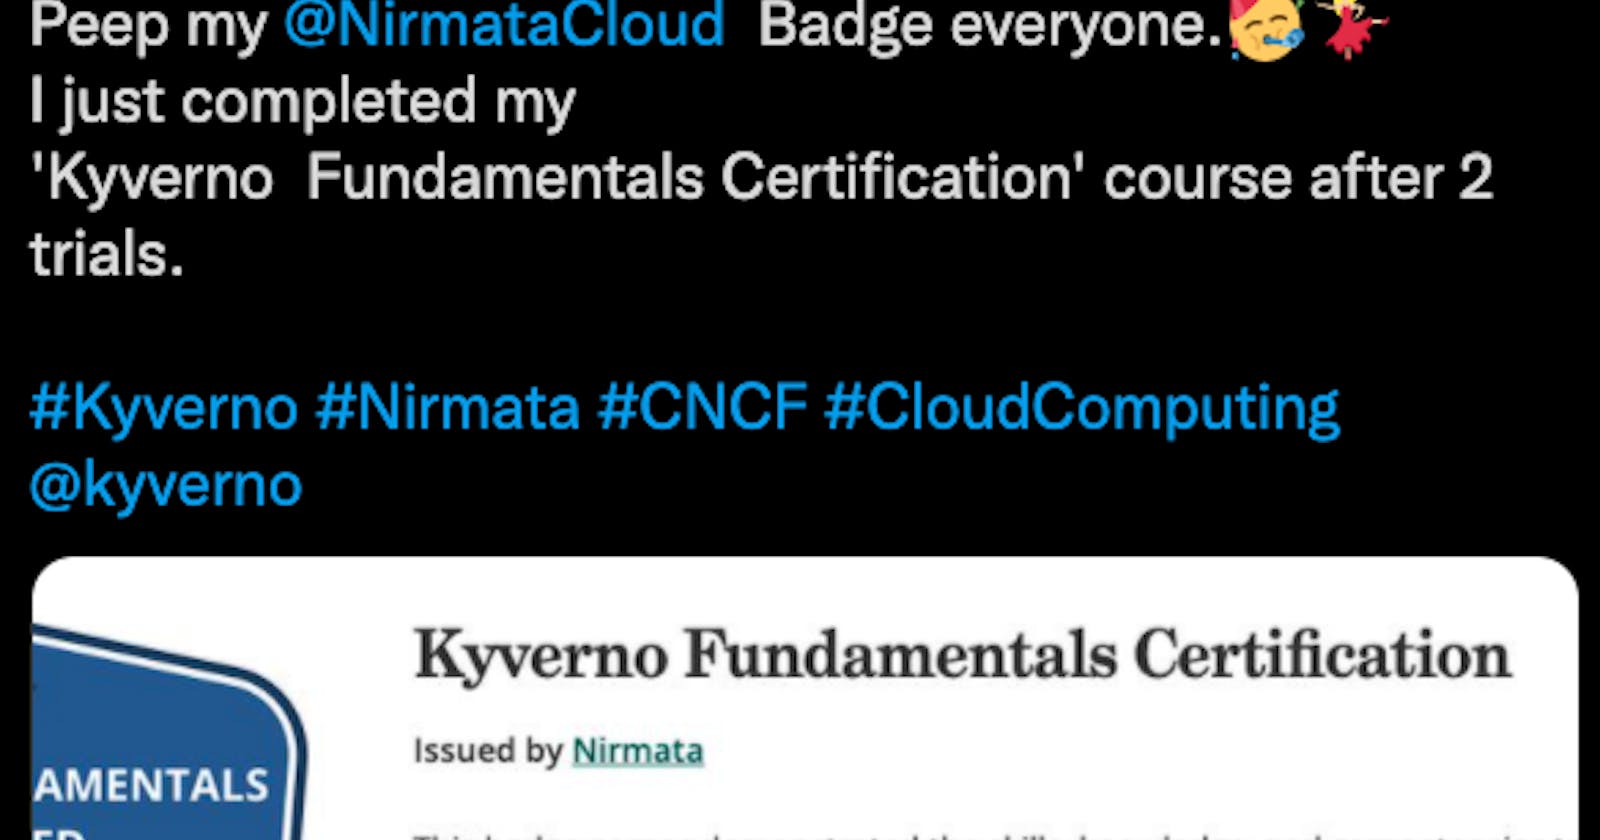 Getting the Kyverno Fundamentals Certificate.